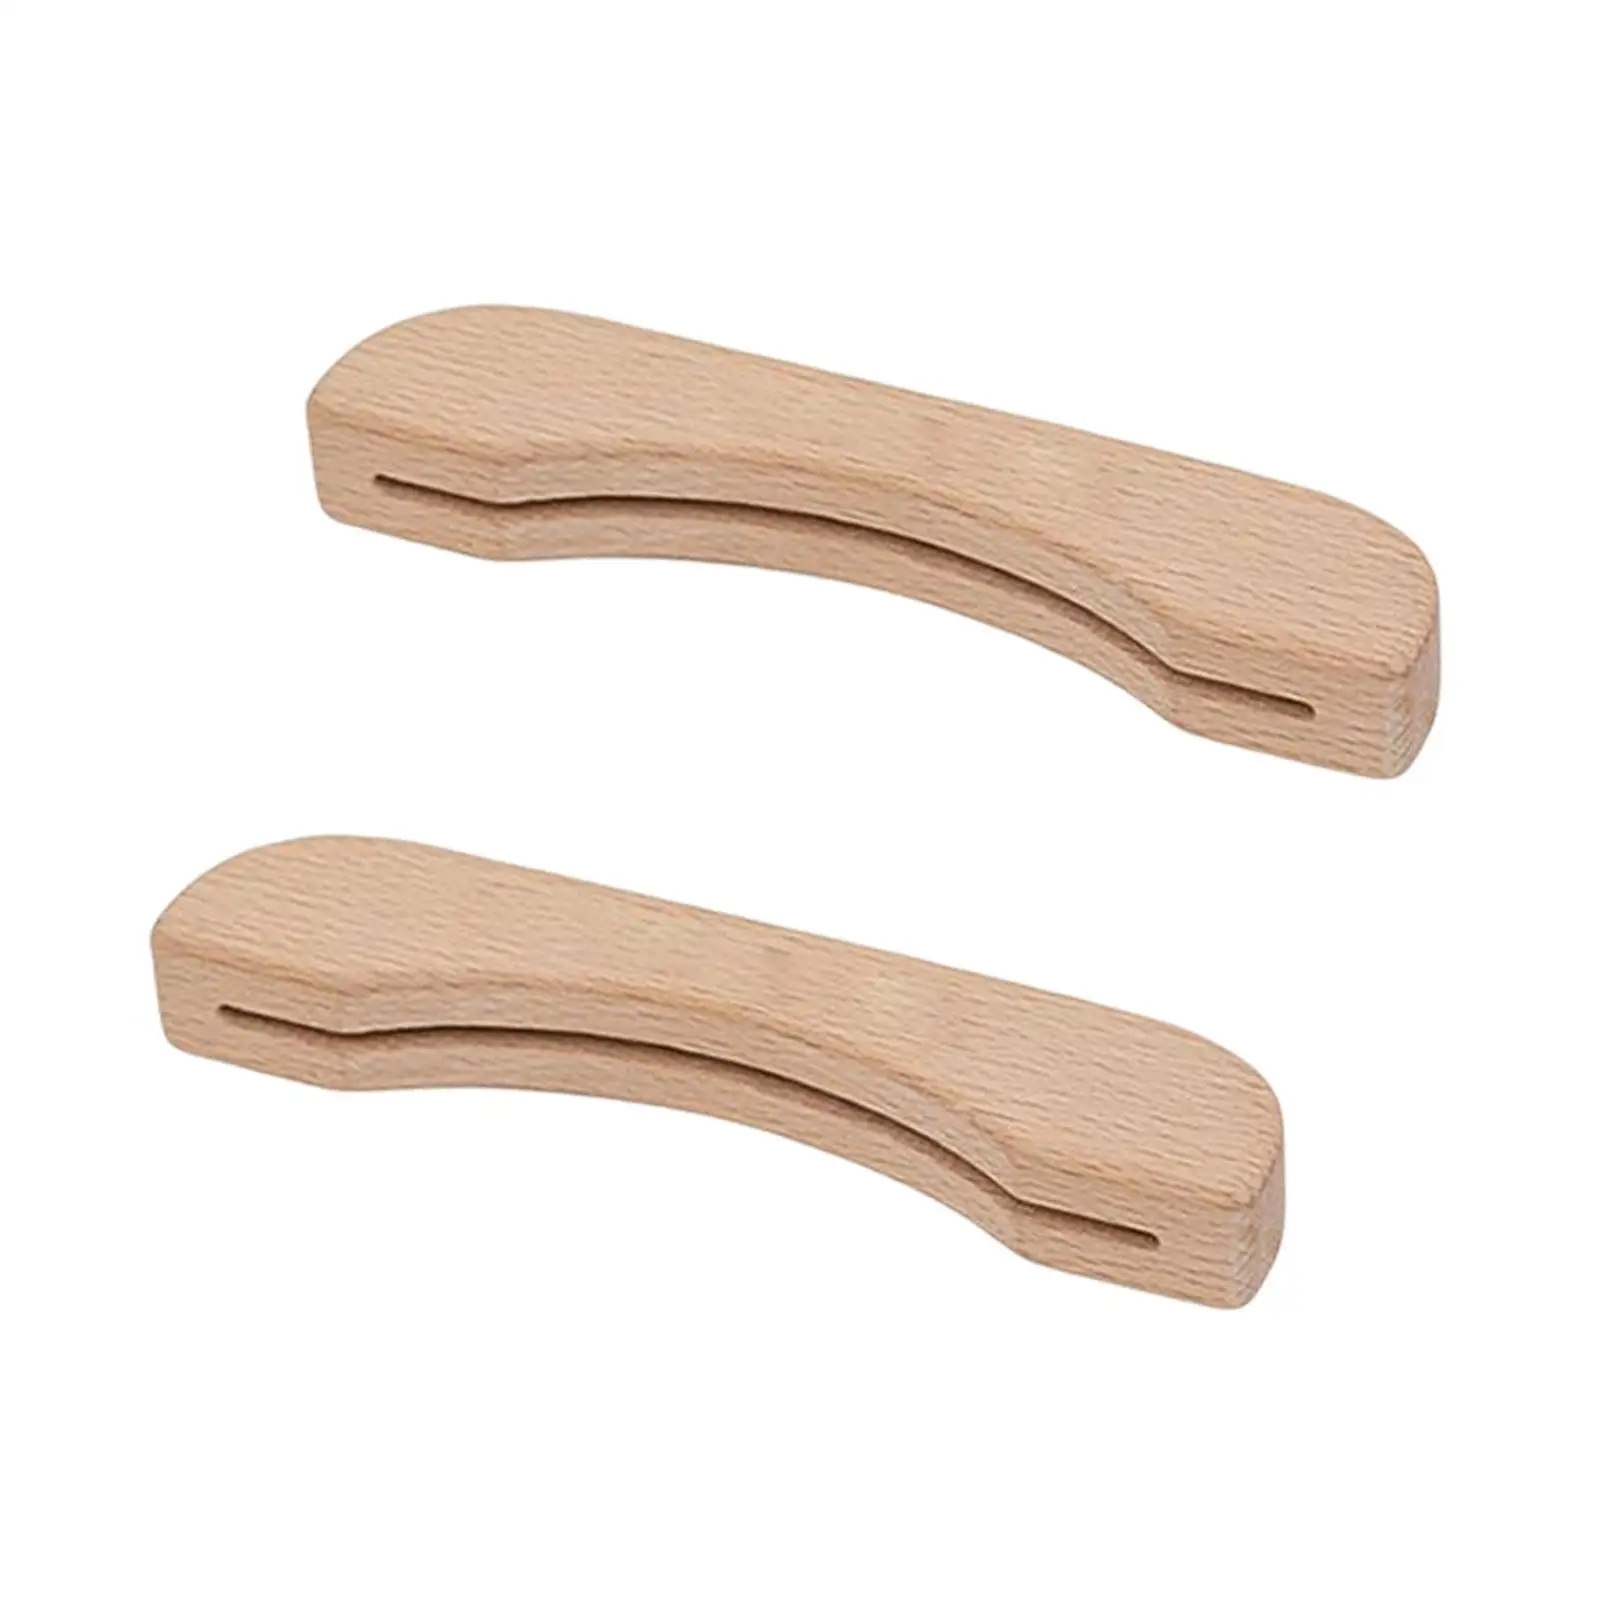 2Pcs Wooden BBQ Barbecue Pan Handle Replacement Scald for Pot Griddle